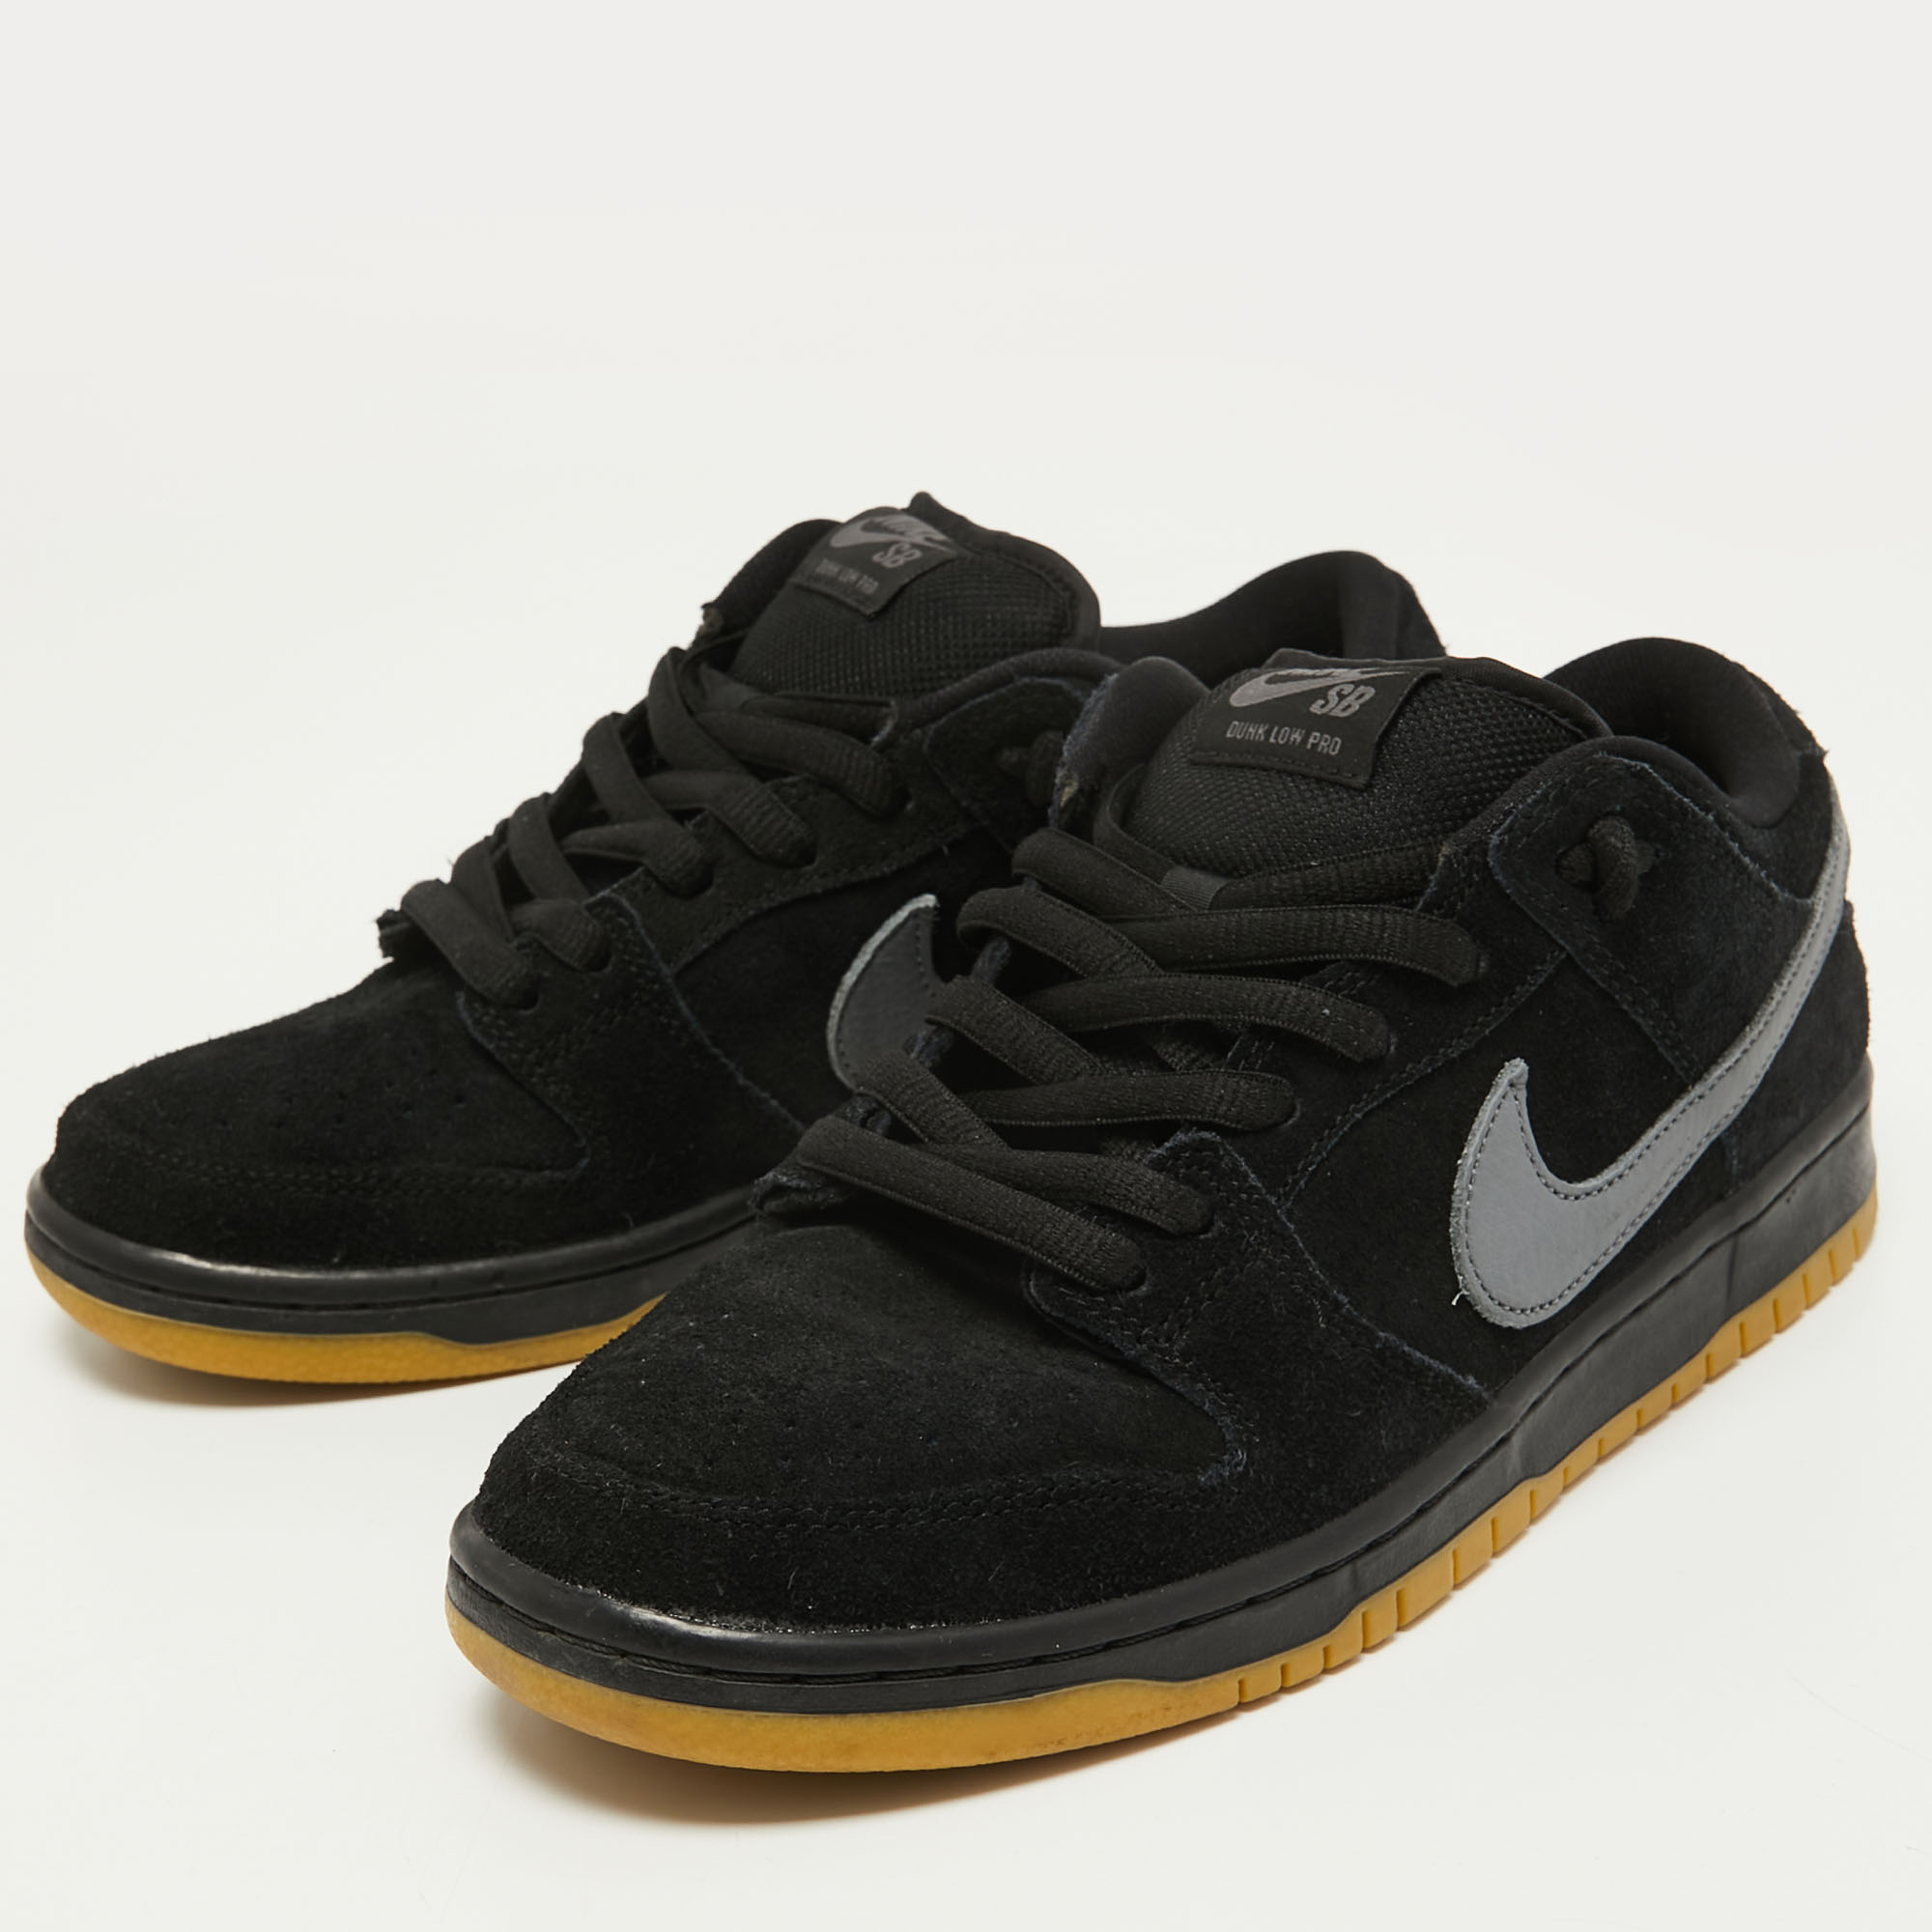 

Nike Black Suede SB Dunk Low Pro Sneakers Size